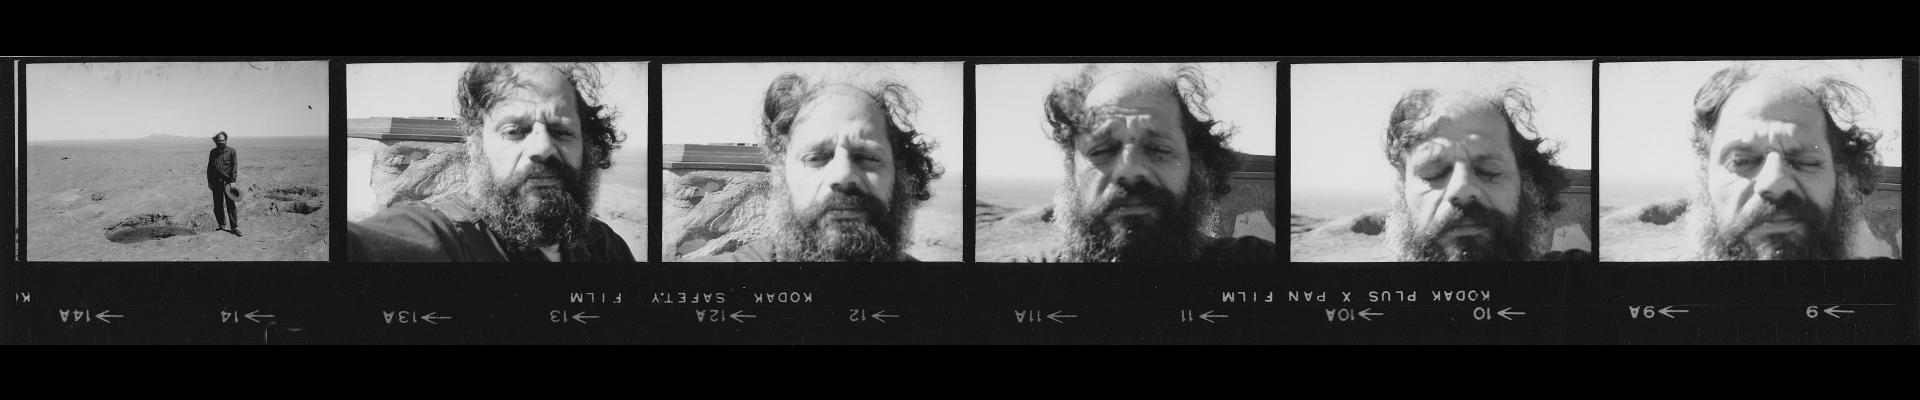 Contact sheet photos of the poet in Central Australia. Courtesy of the Estate of Allen Ginsberg